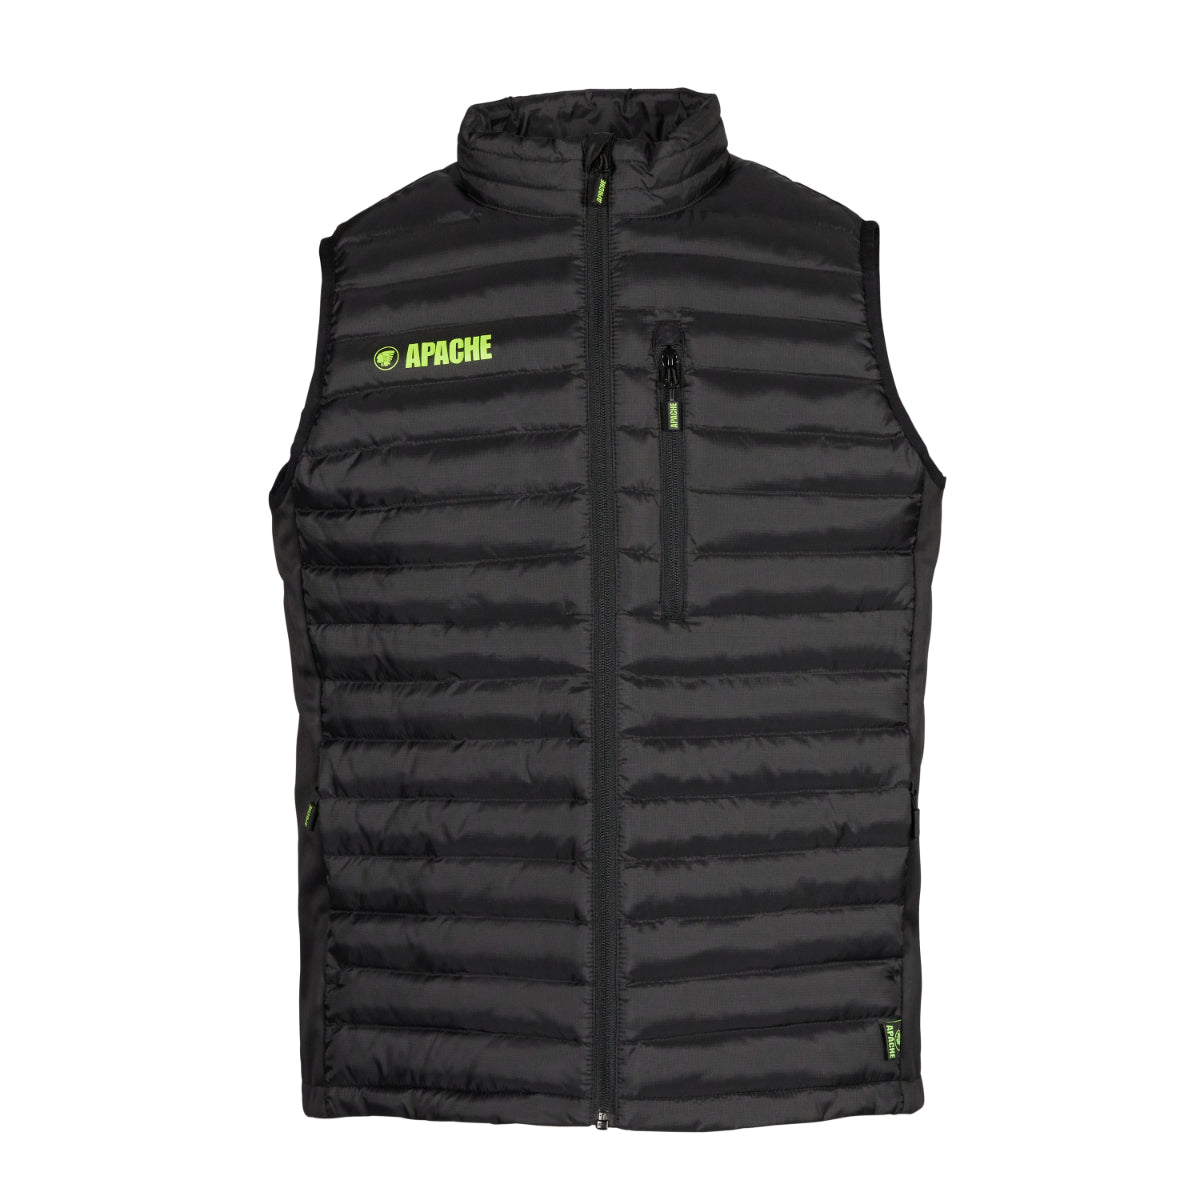 Apache Stretch Gilet with recycled polyester baffles